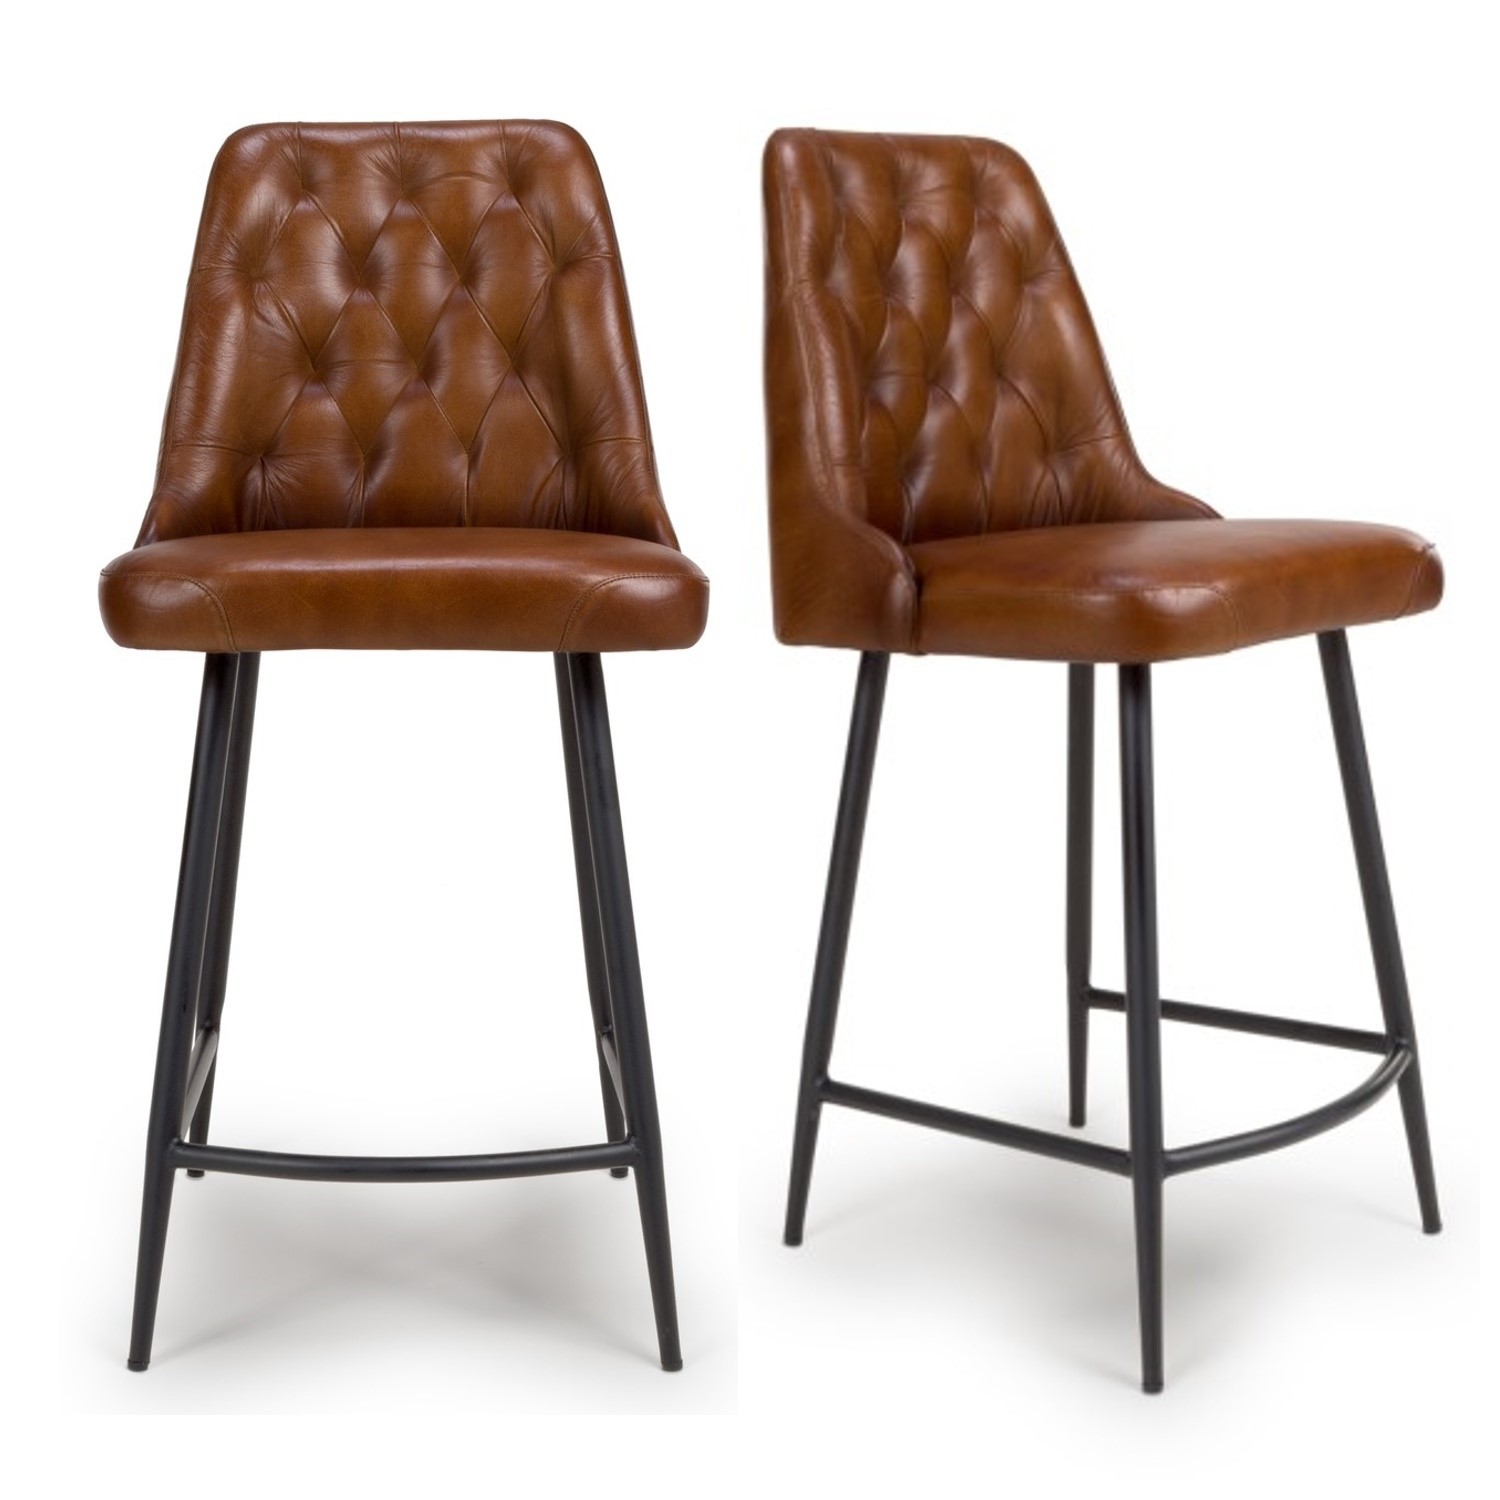 Photo of Set of 2 real leather tan kitchen stools with quilted back - jaxson